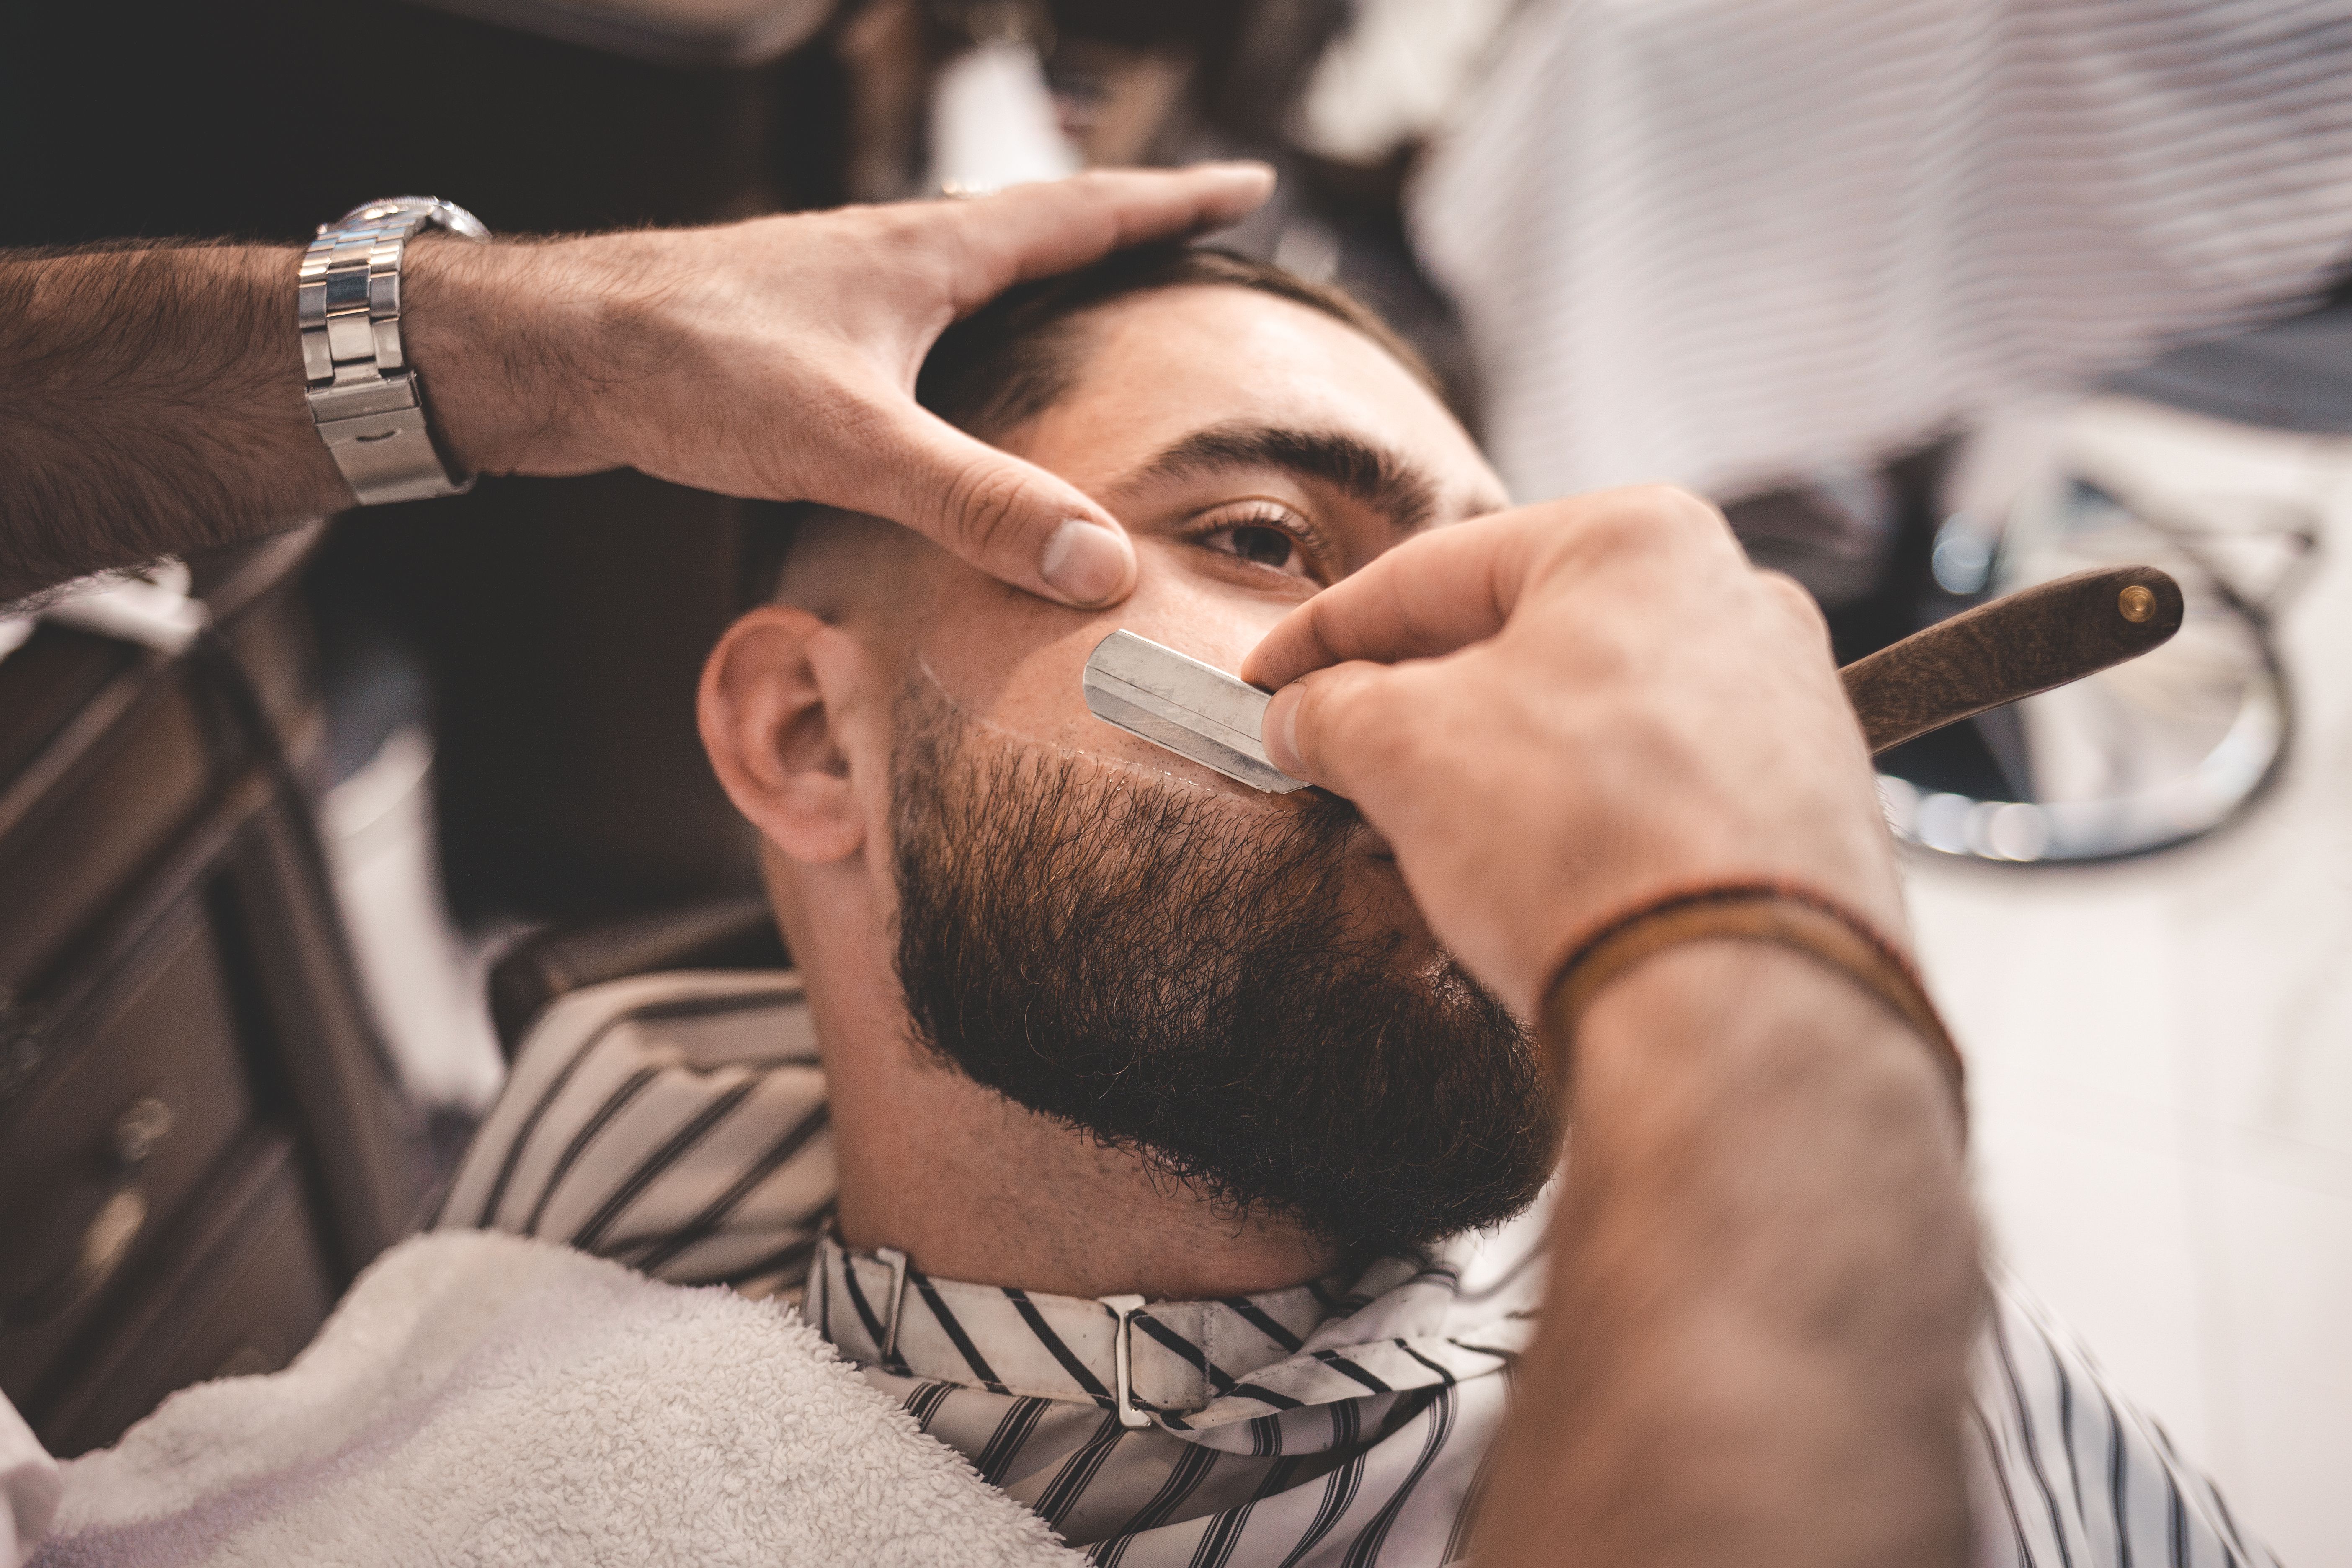 What is beard care about?